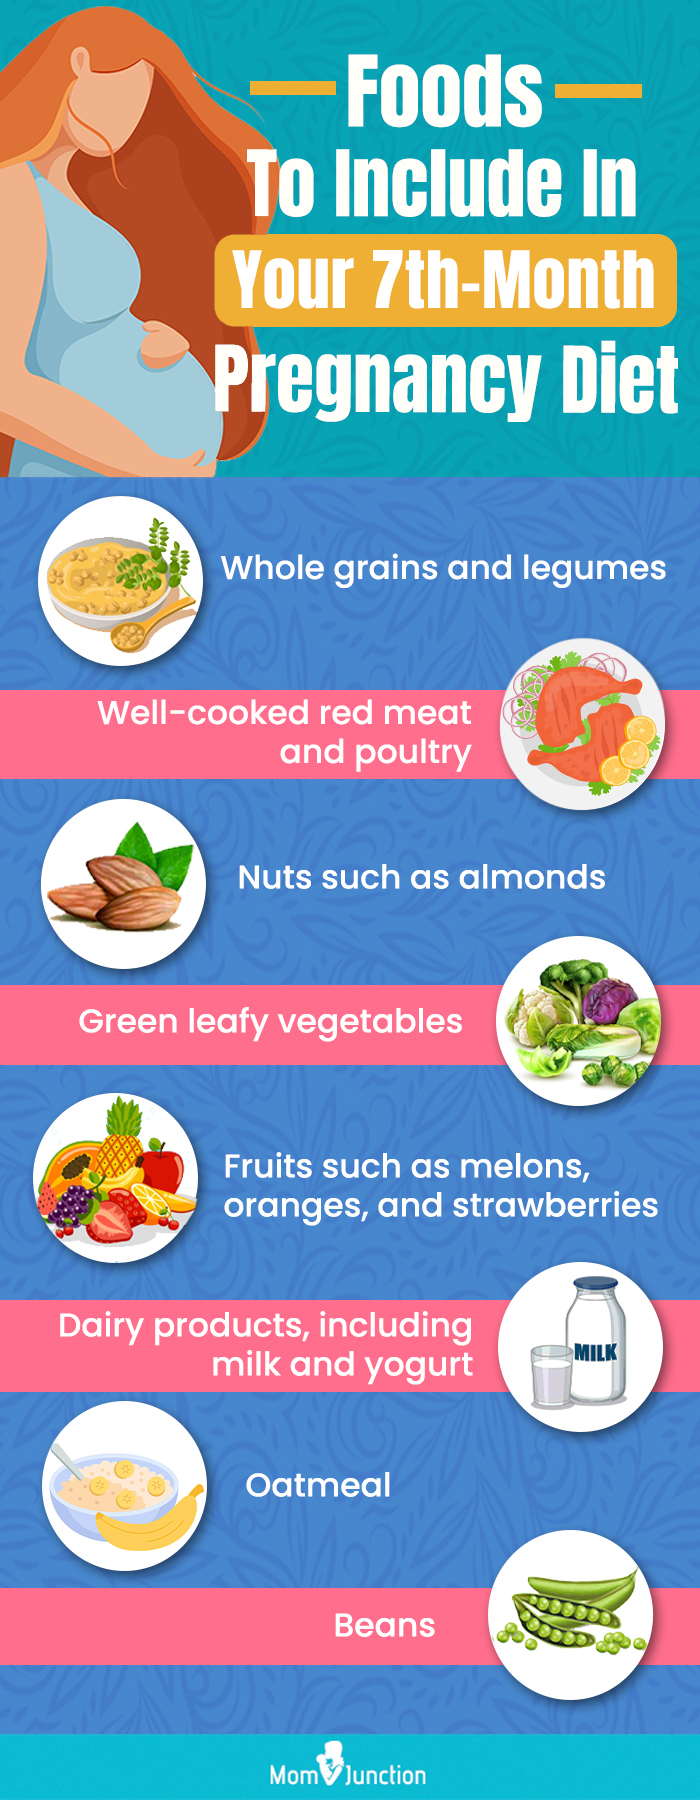 foods to include in your 7th month pregnancy diet (infographic)